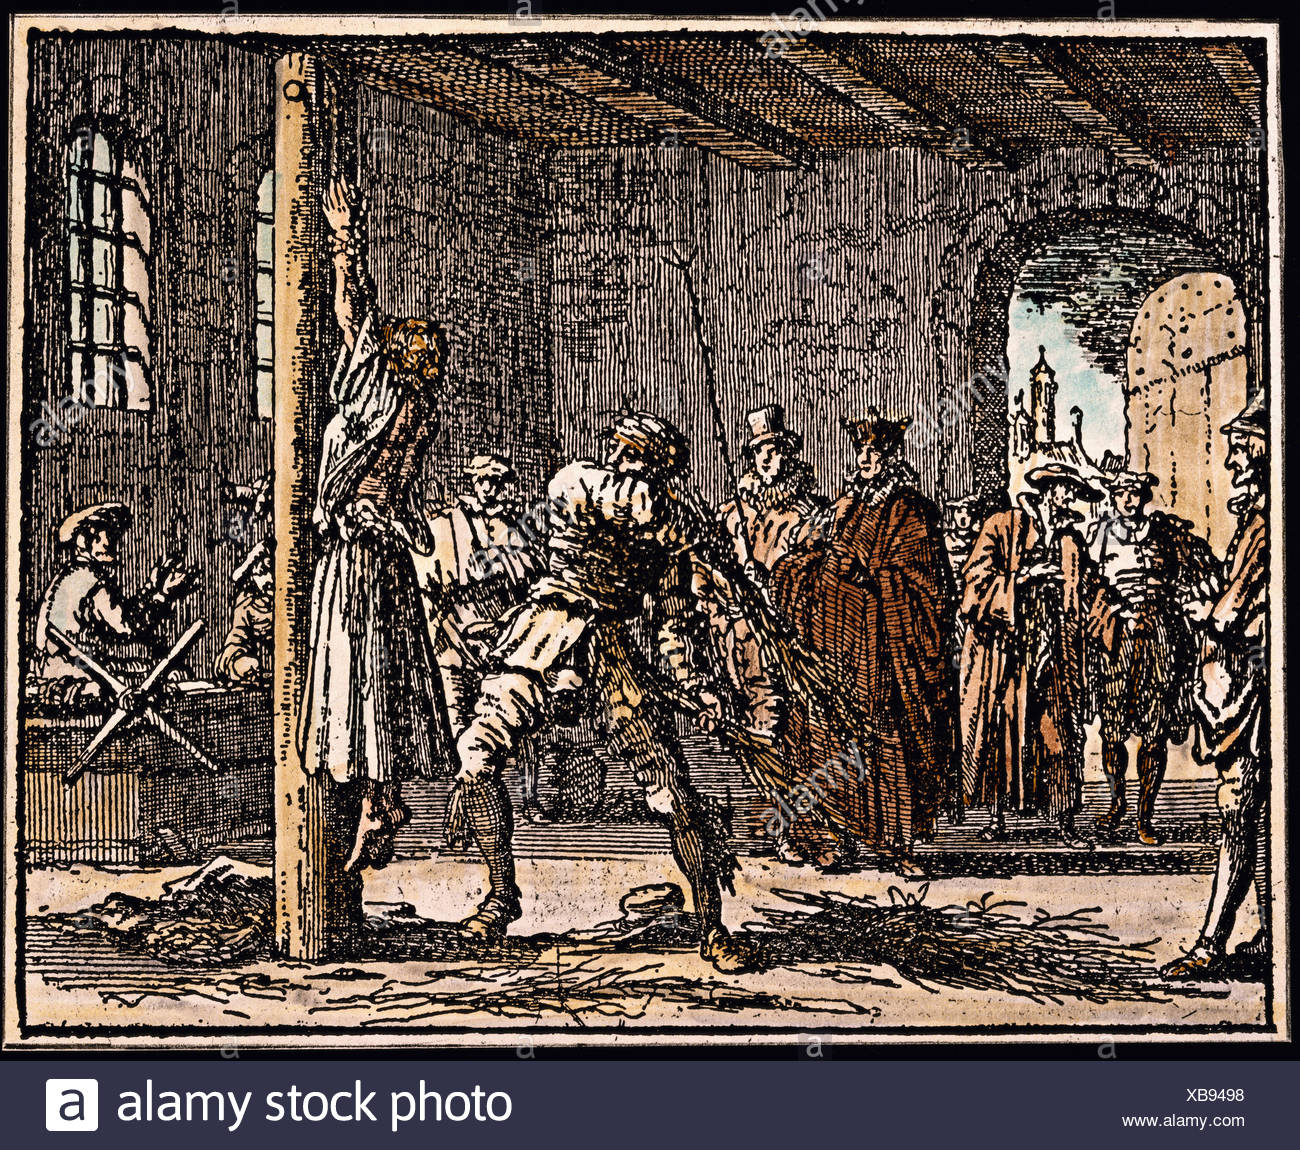 Torture Witch Stock Photos & Torture Witch Stock Images - Alamy